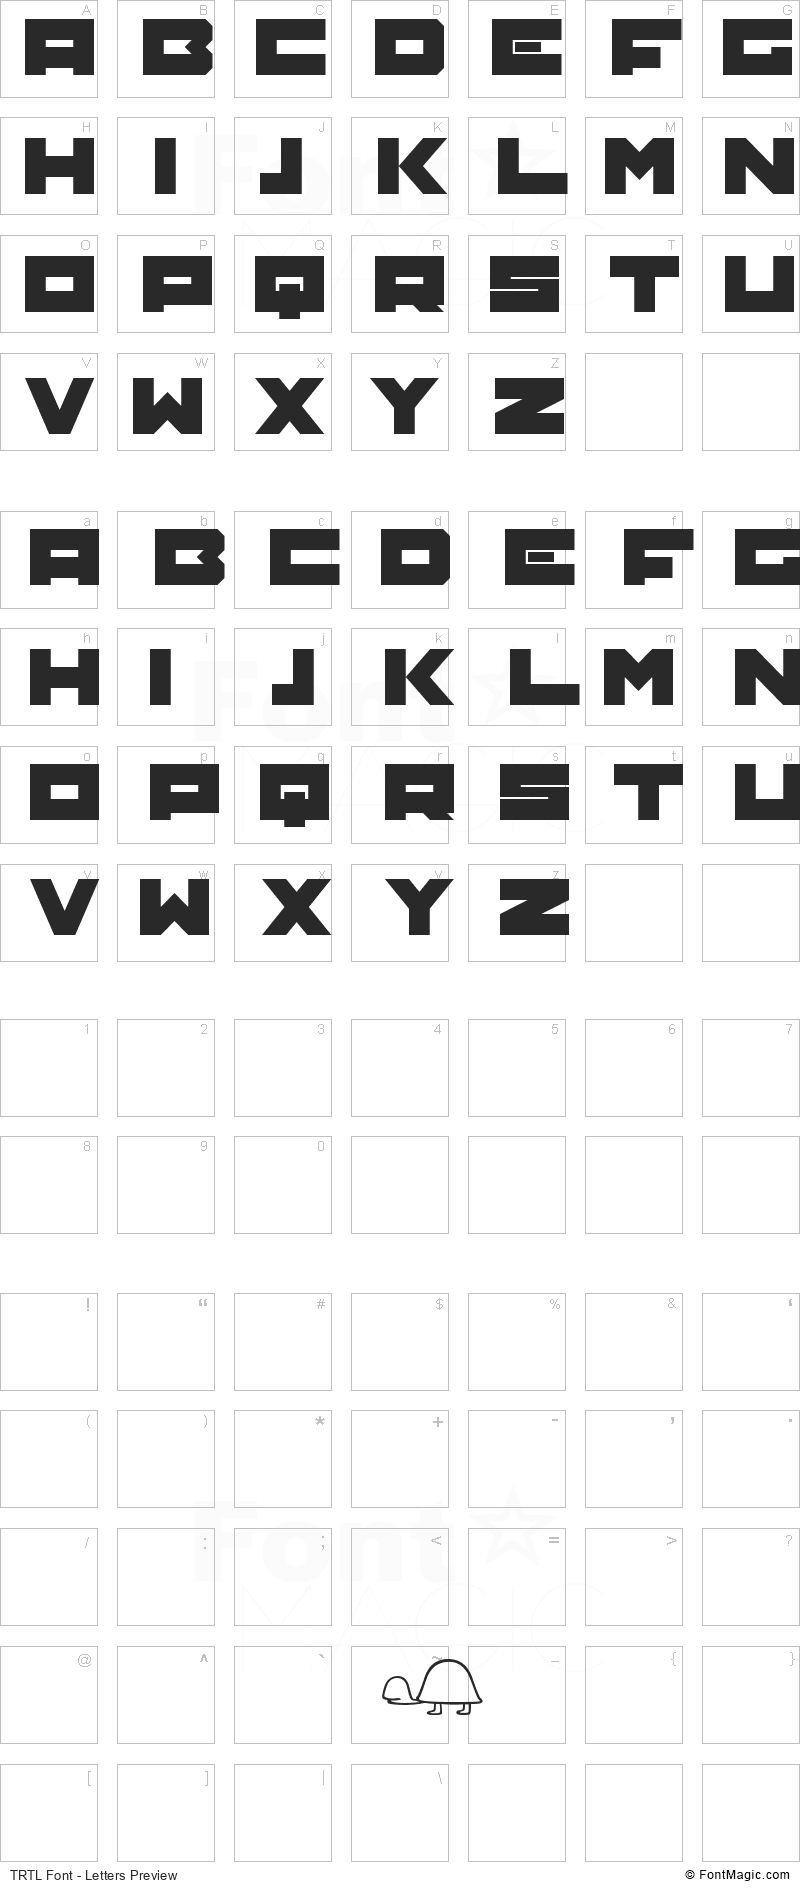 TRTL Font - All Latters Preview Chart